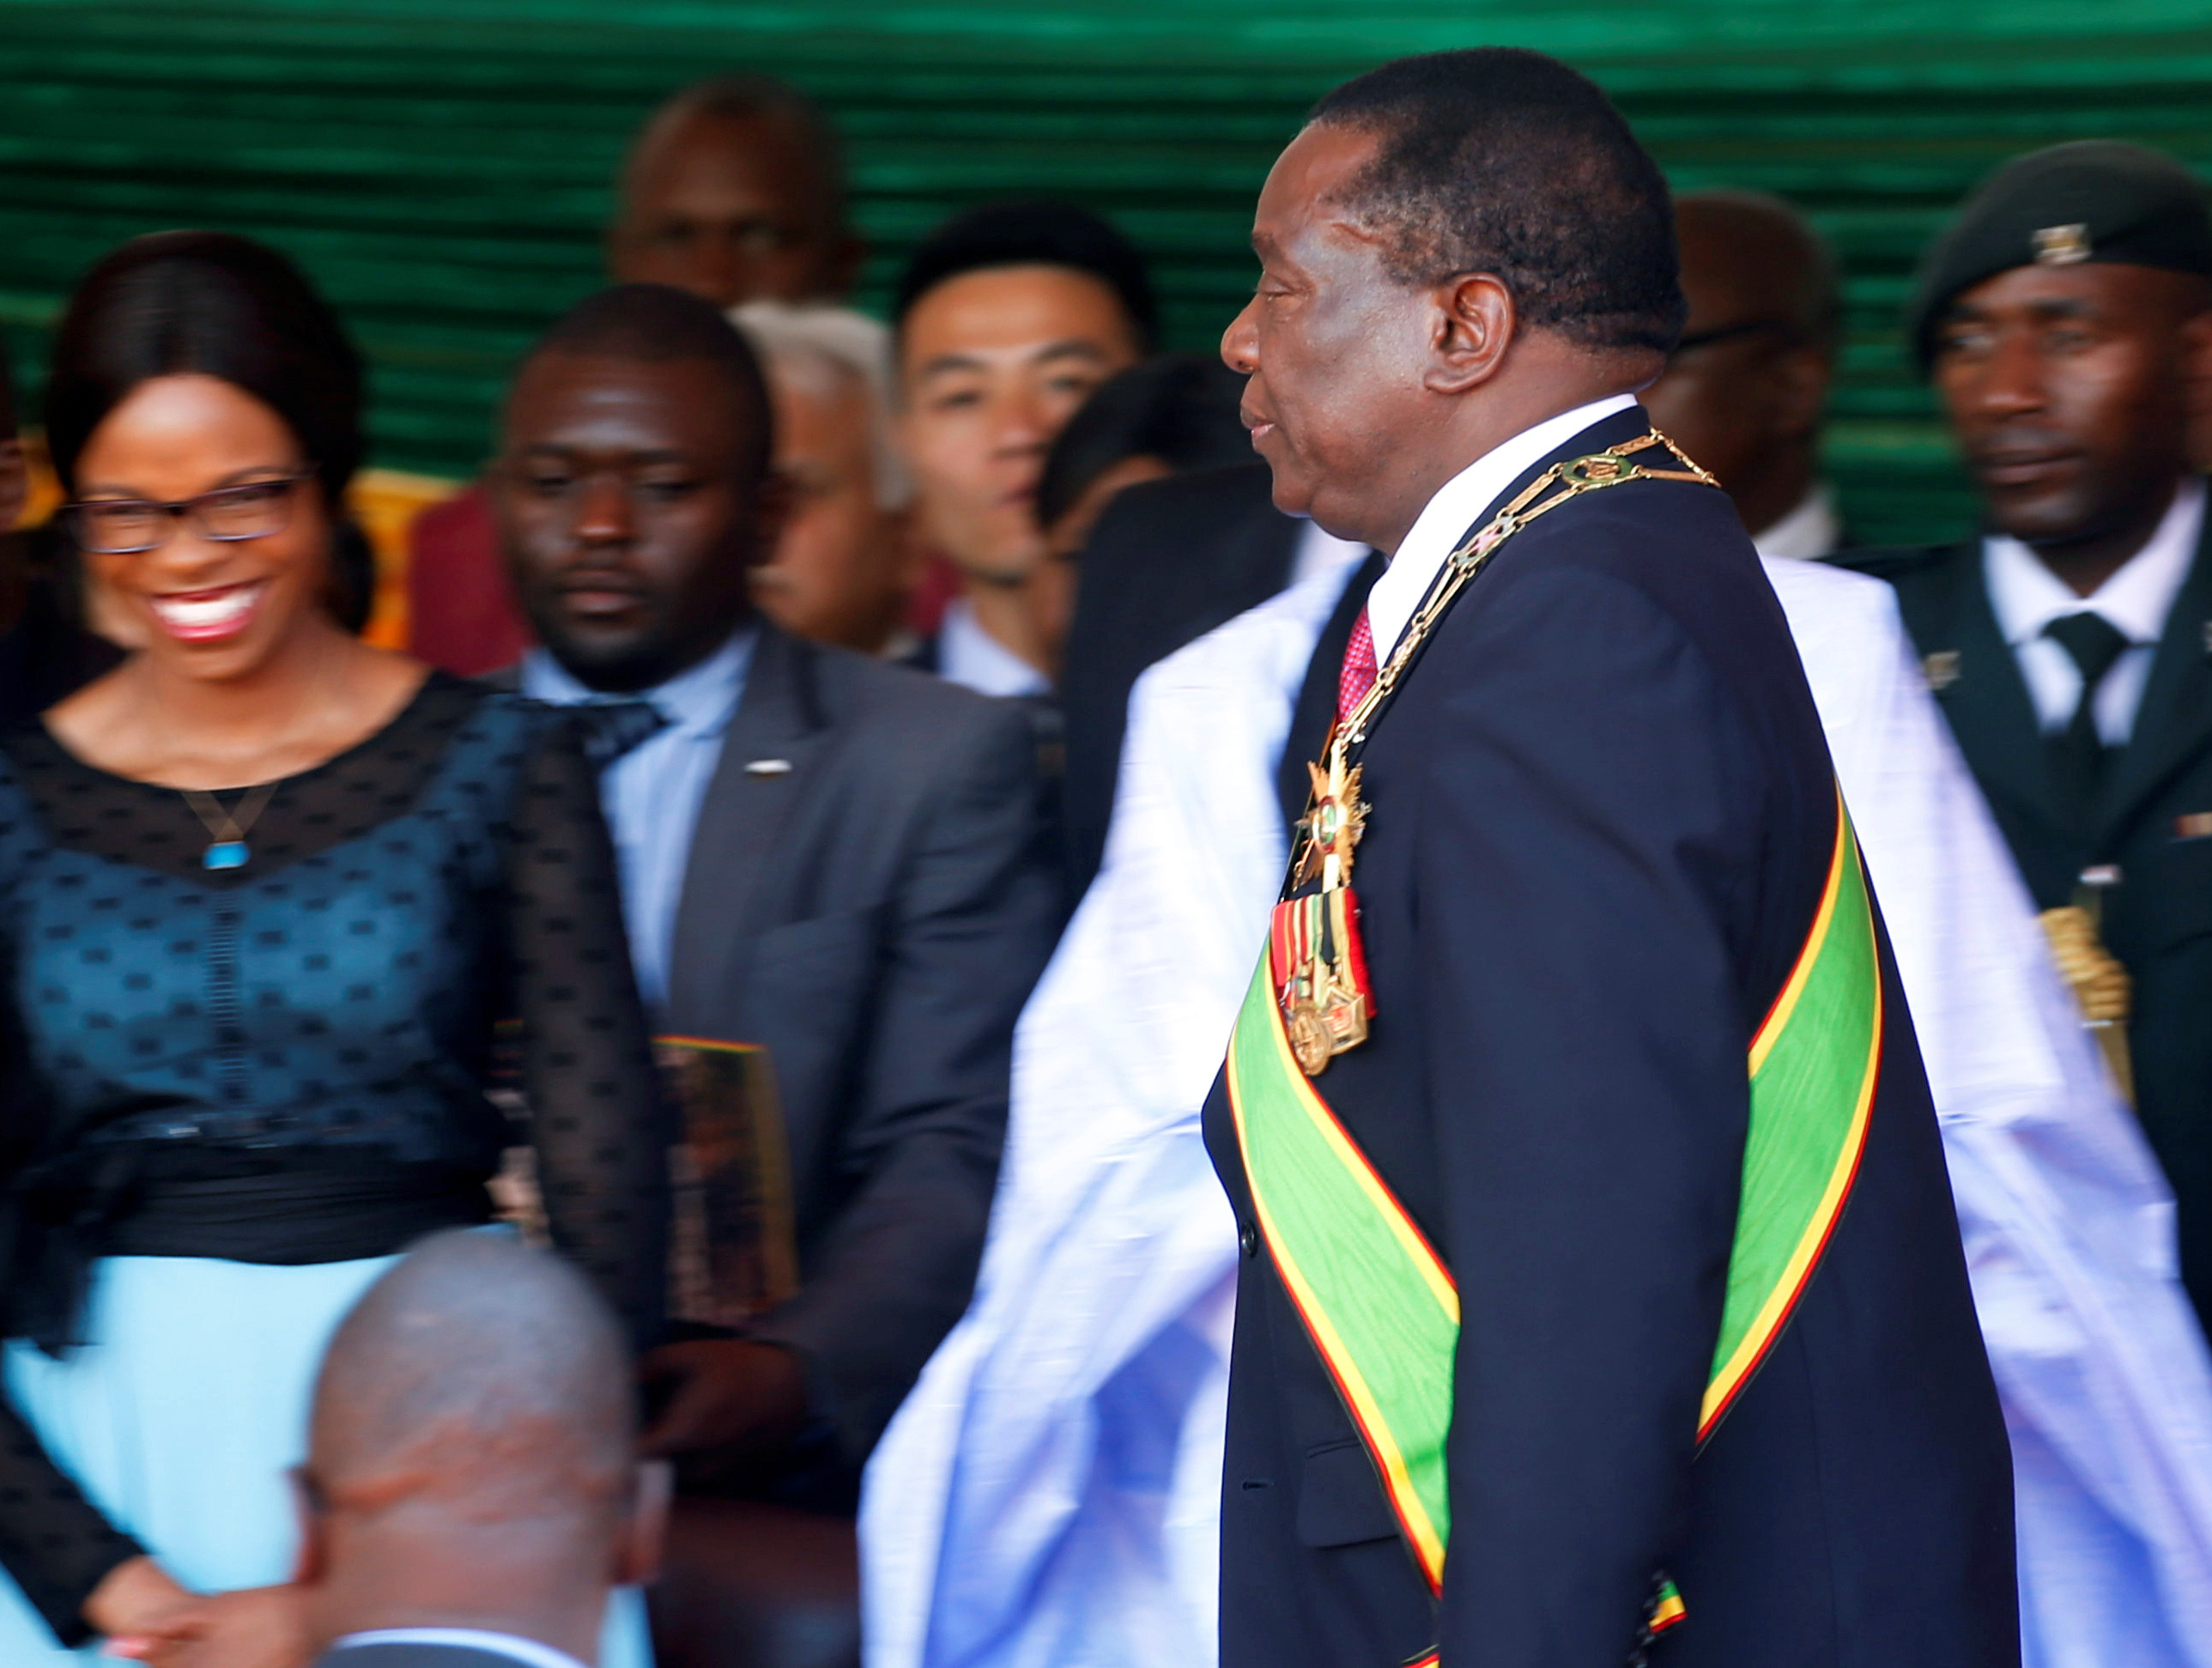 Dignitaries and supporters of Zimbabwe's President Emmerson Mnangagwa look on after he was sworn in during his presidential inauguration ceremony in Harare